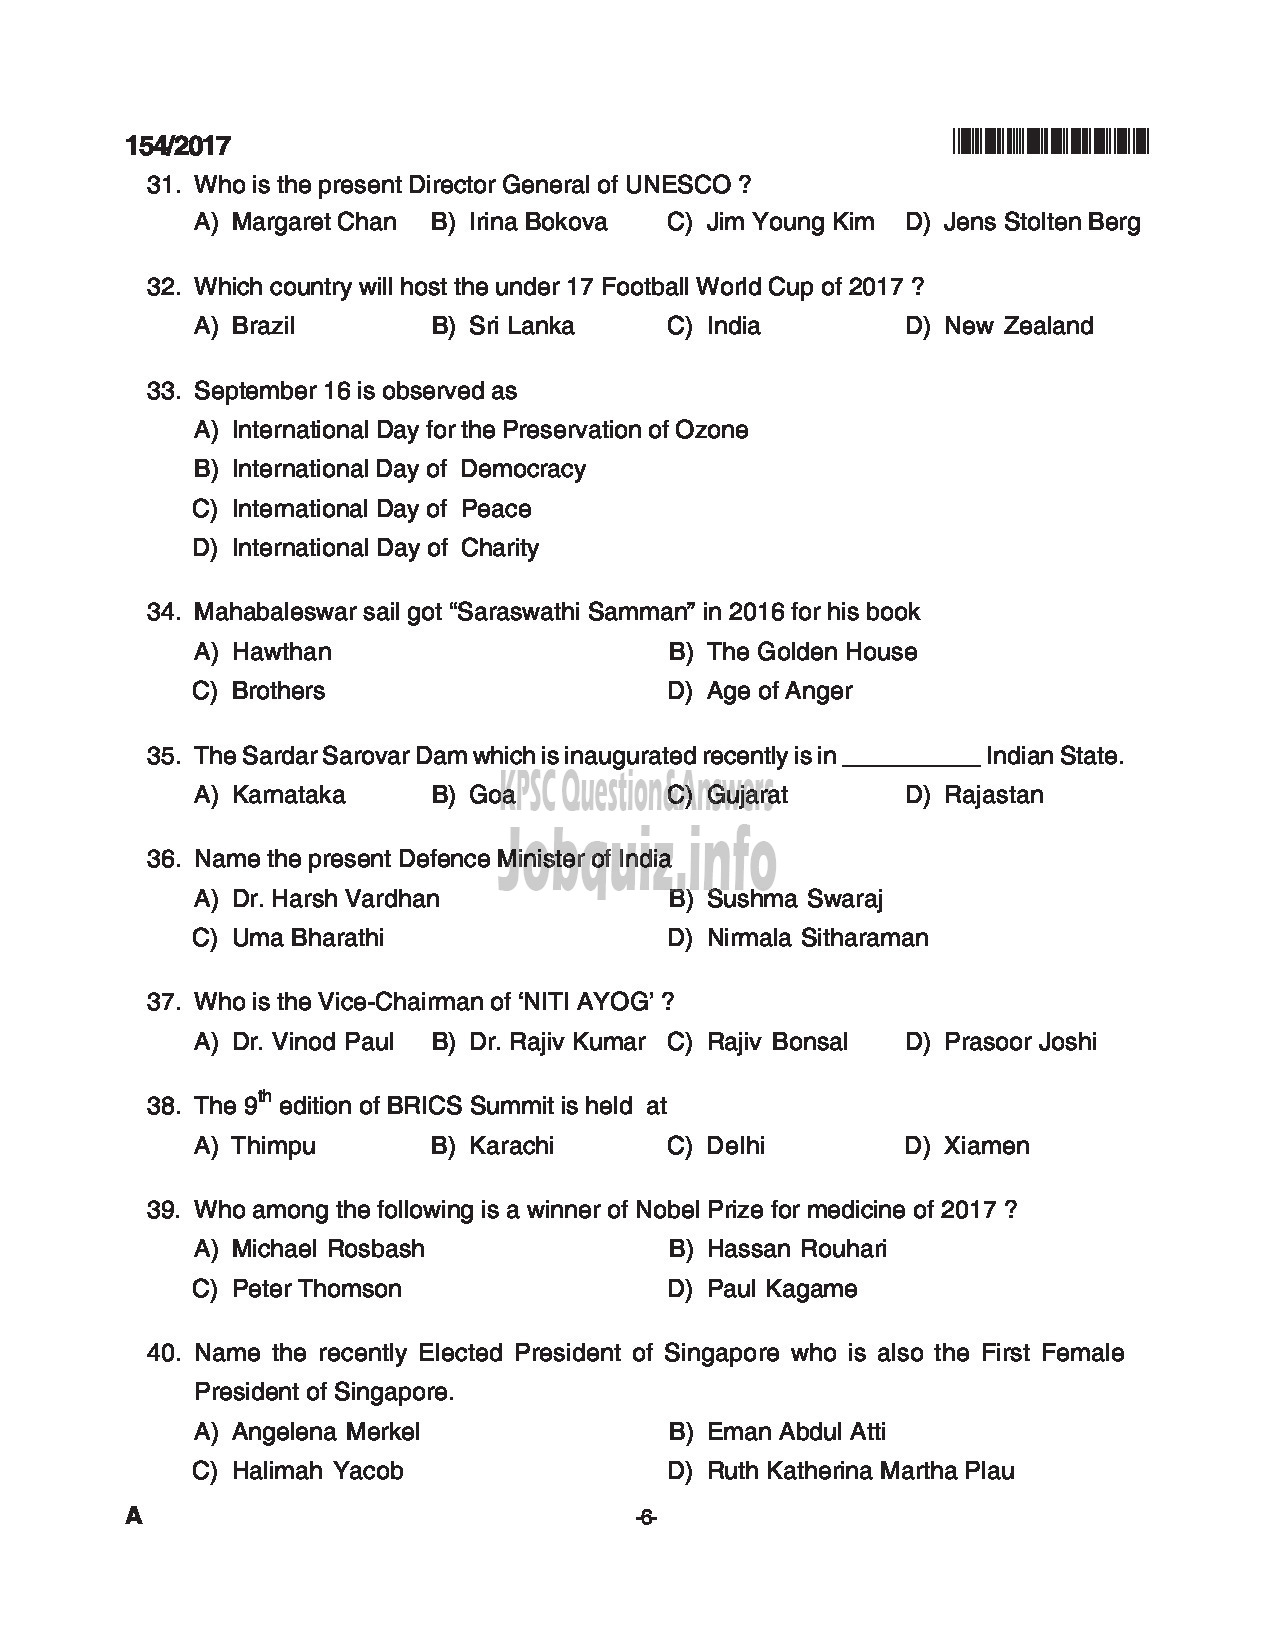 Kerala PSC Question Paper - ARMED POLICE SUB INSPECTOR TRAINEE SR FOR SC/ST POLICE ARMED POLICE BATTALION-6